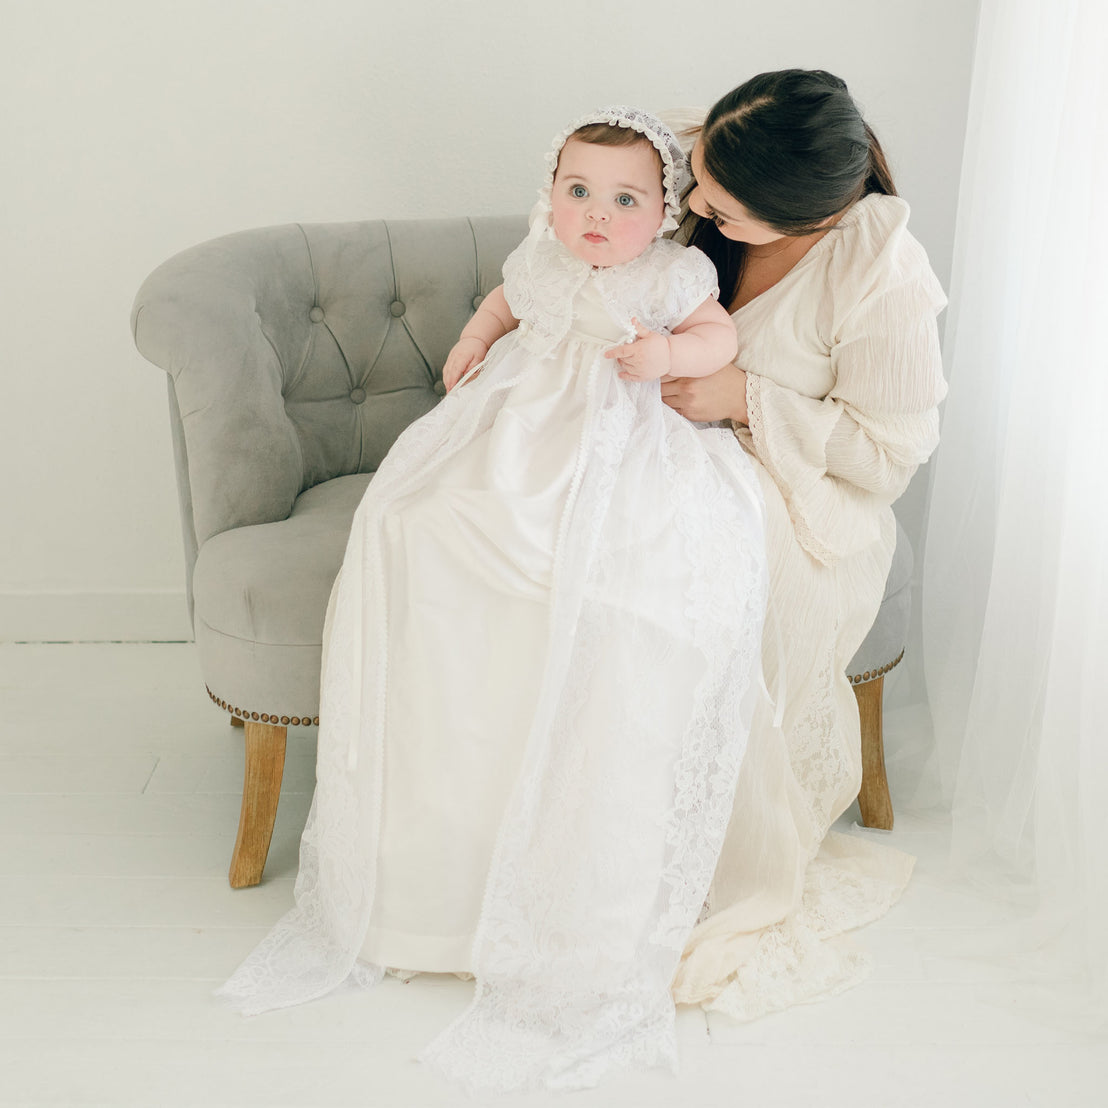 A mother in a cream dress sits on a grey sofa with her baby dressed in the Aria Christening Gown & Bonnet in a bright room, gently holding the baby's hands.